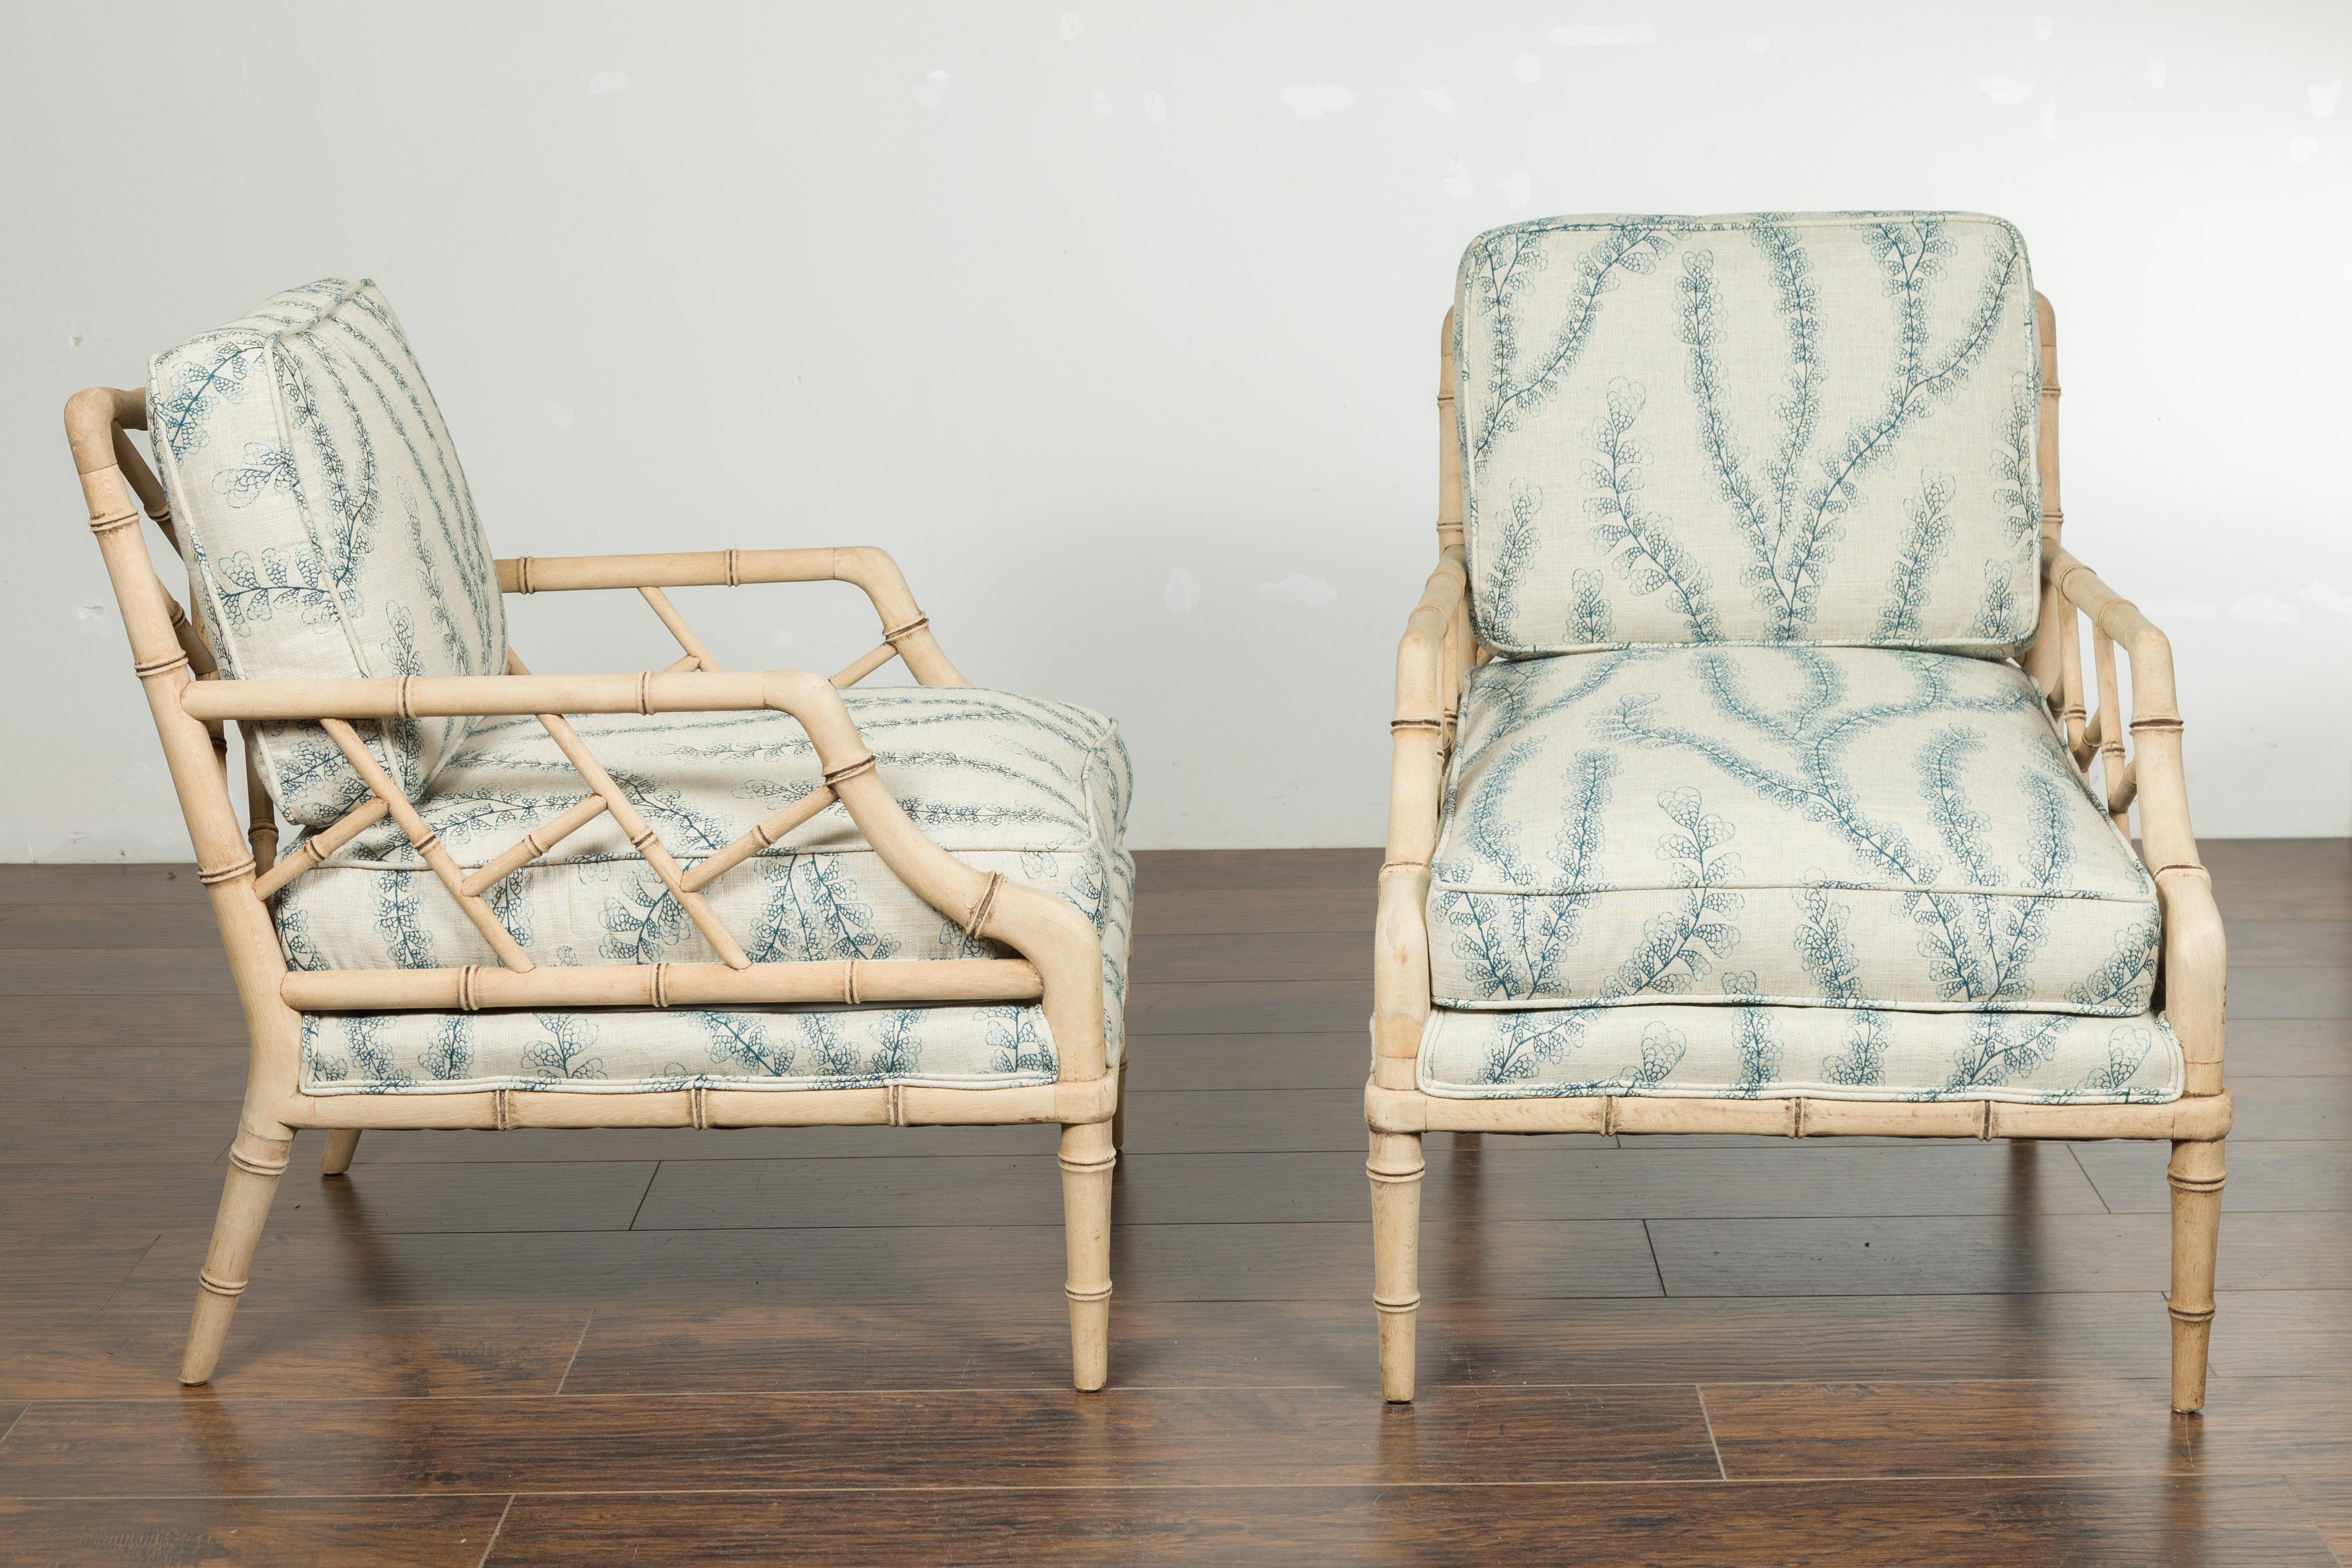 Pair of English Midcentury Walnut Faux Bamboo Lounge Chairs with Upholstery 2